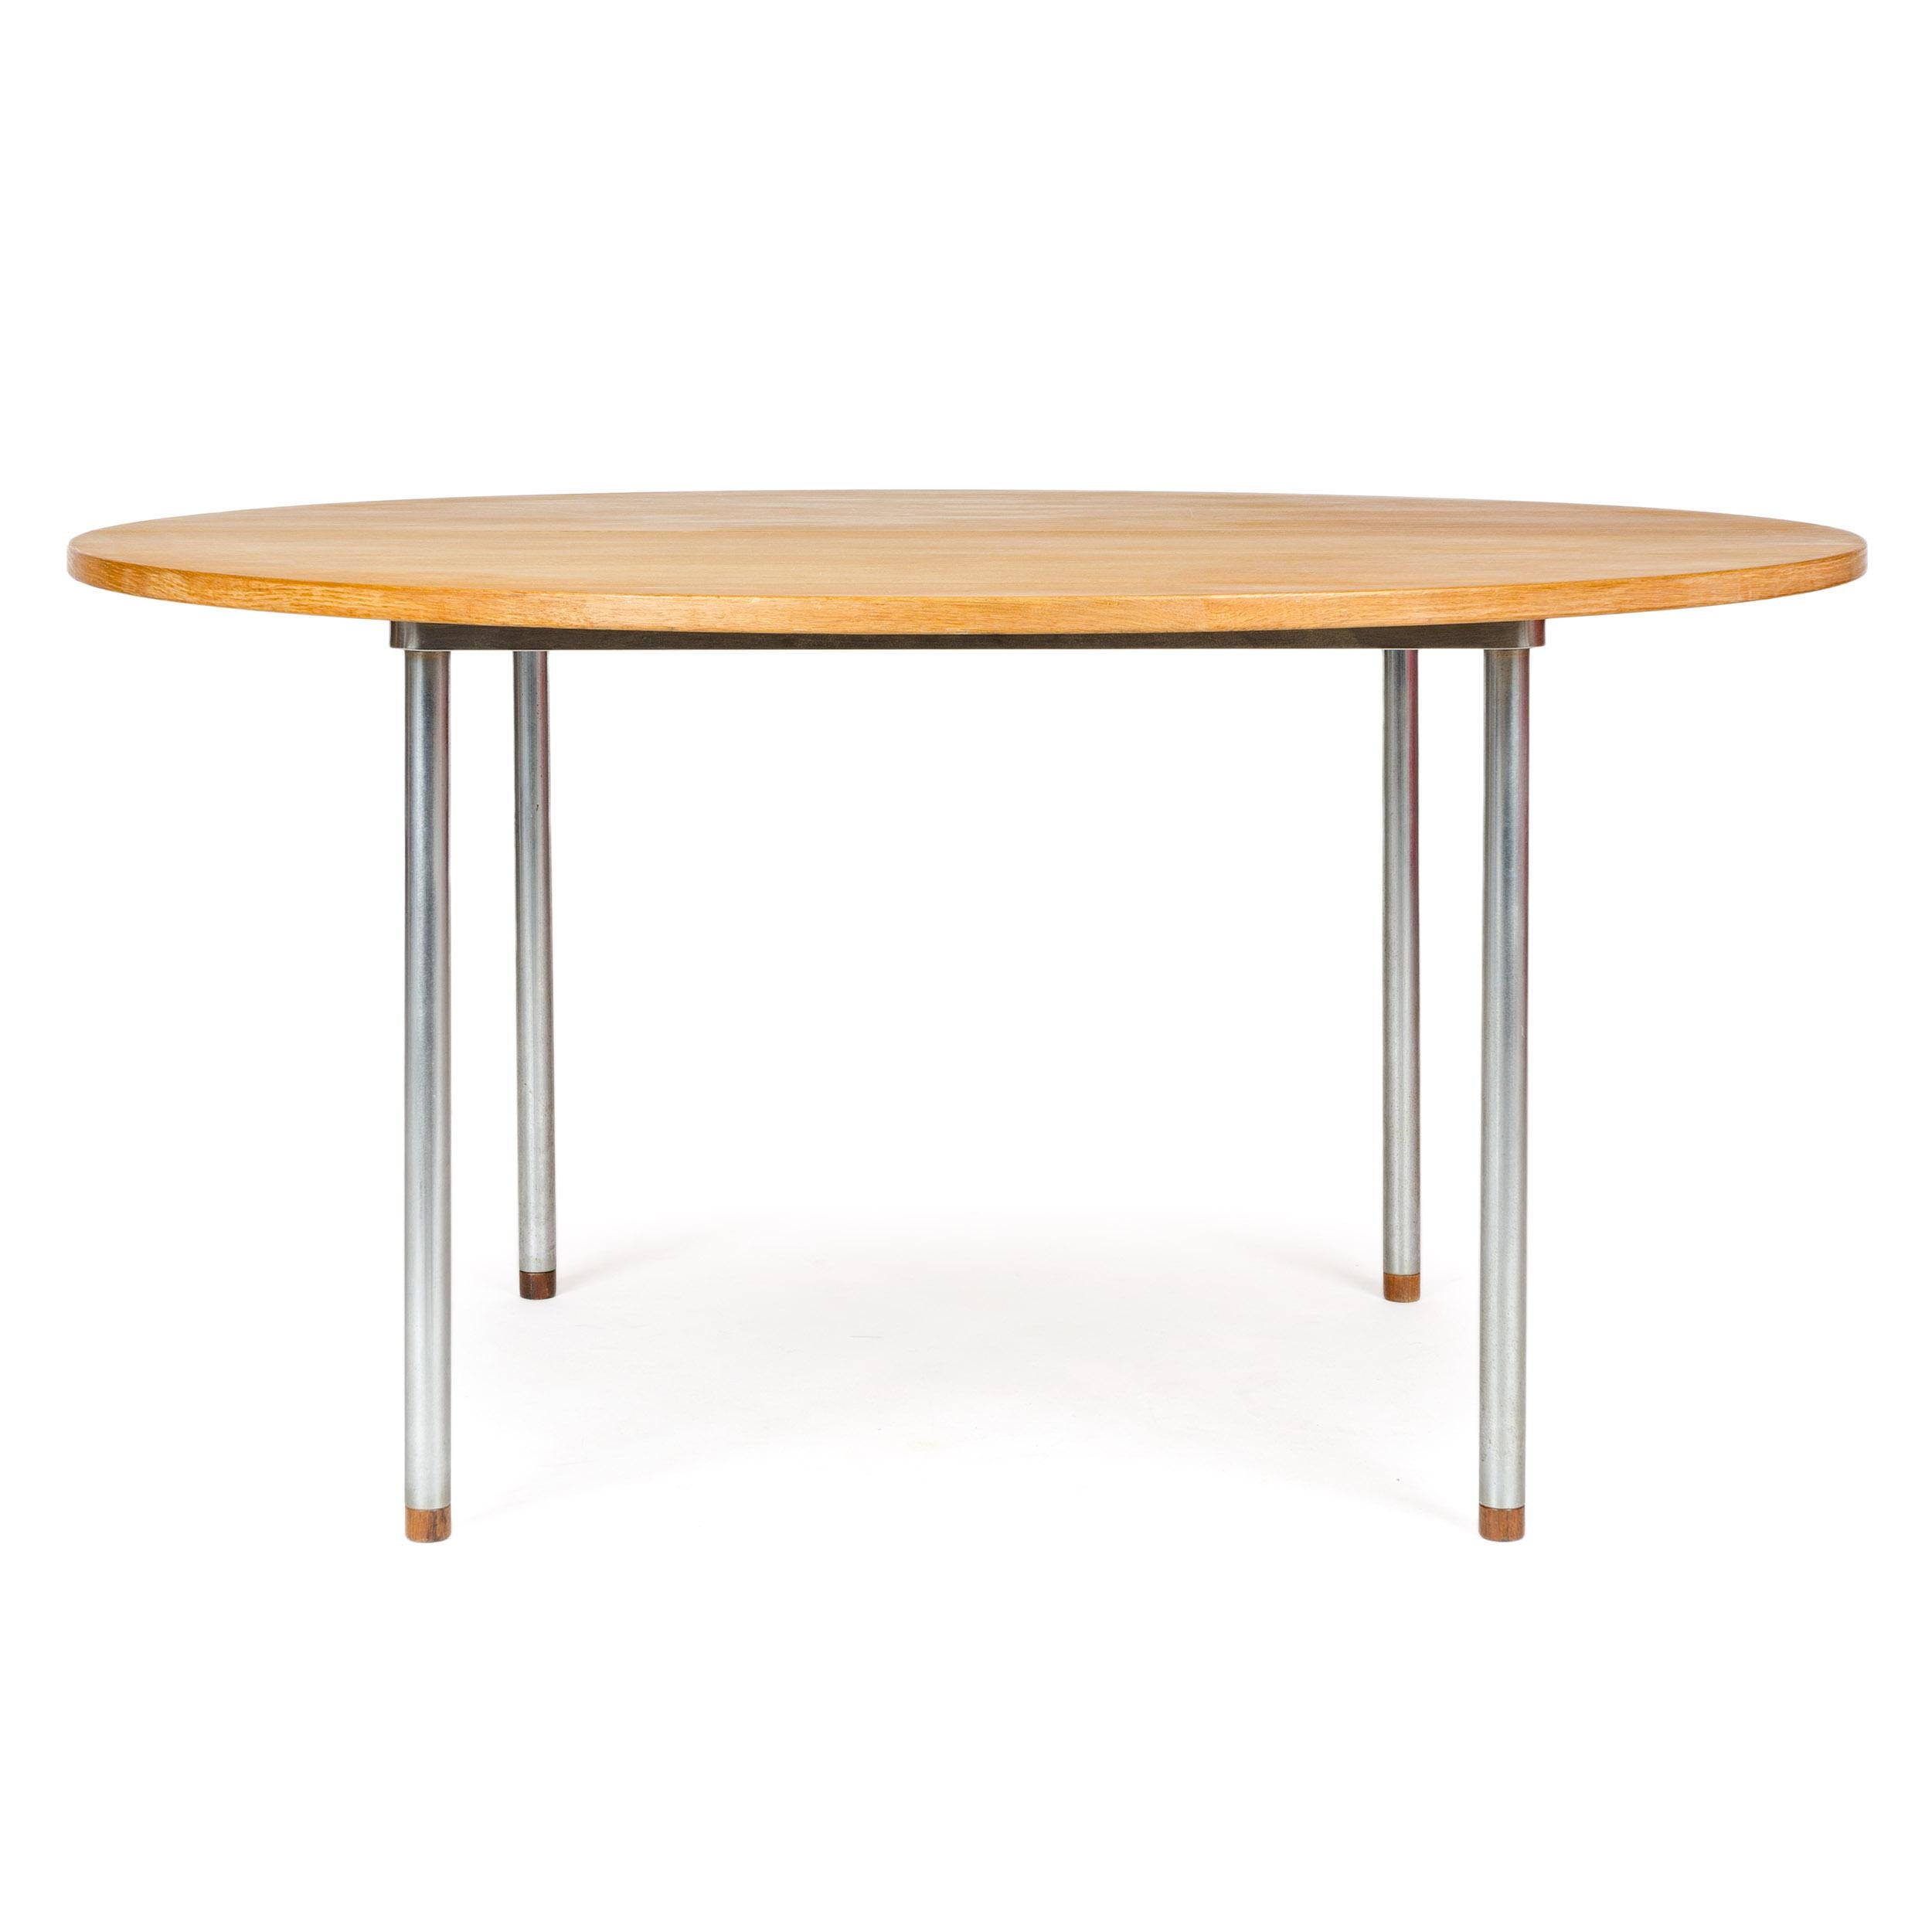 A round extension dining table with oak top set on four tubular chrome legs each tipped with a rosewood insert.